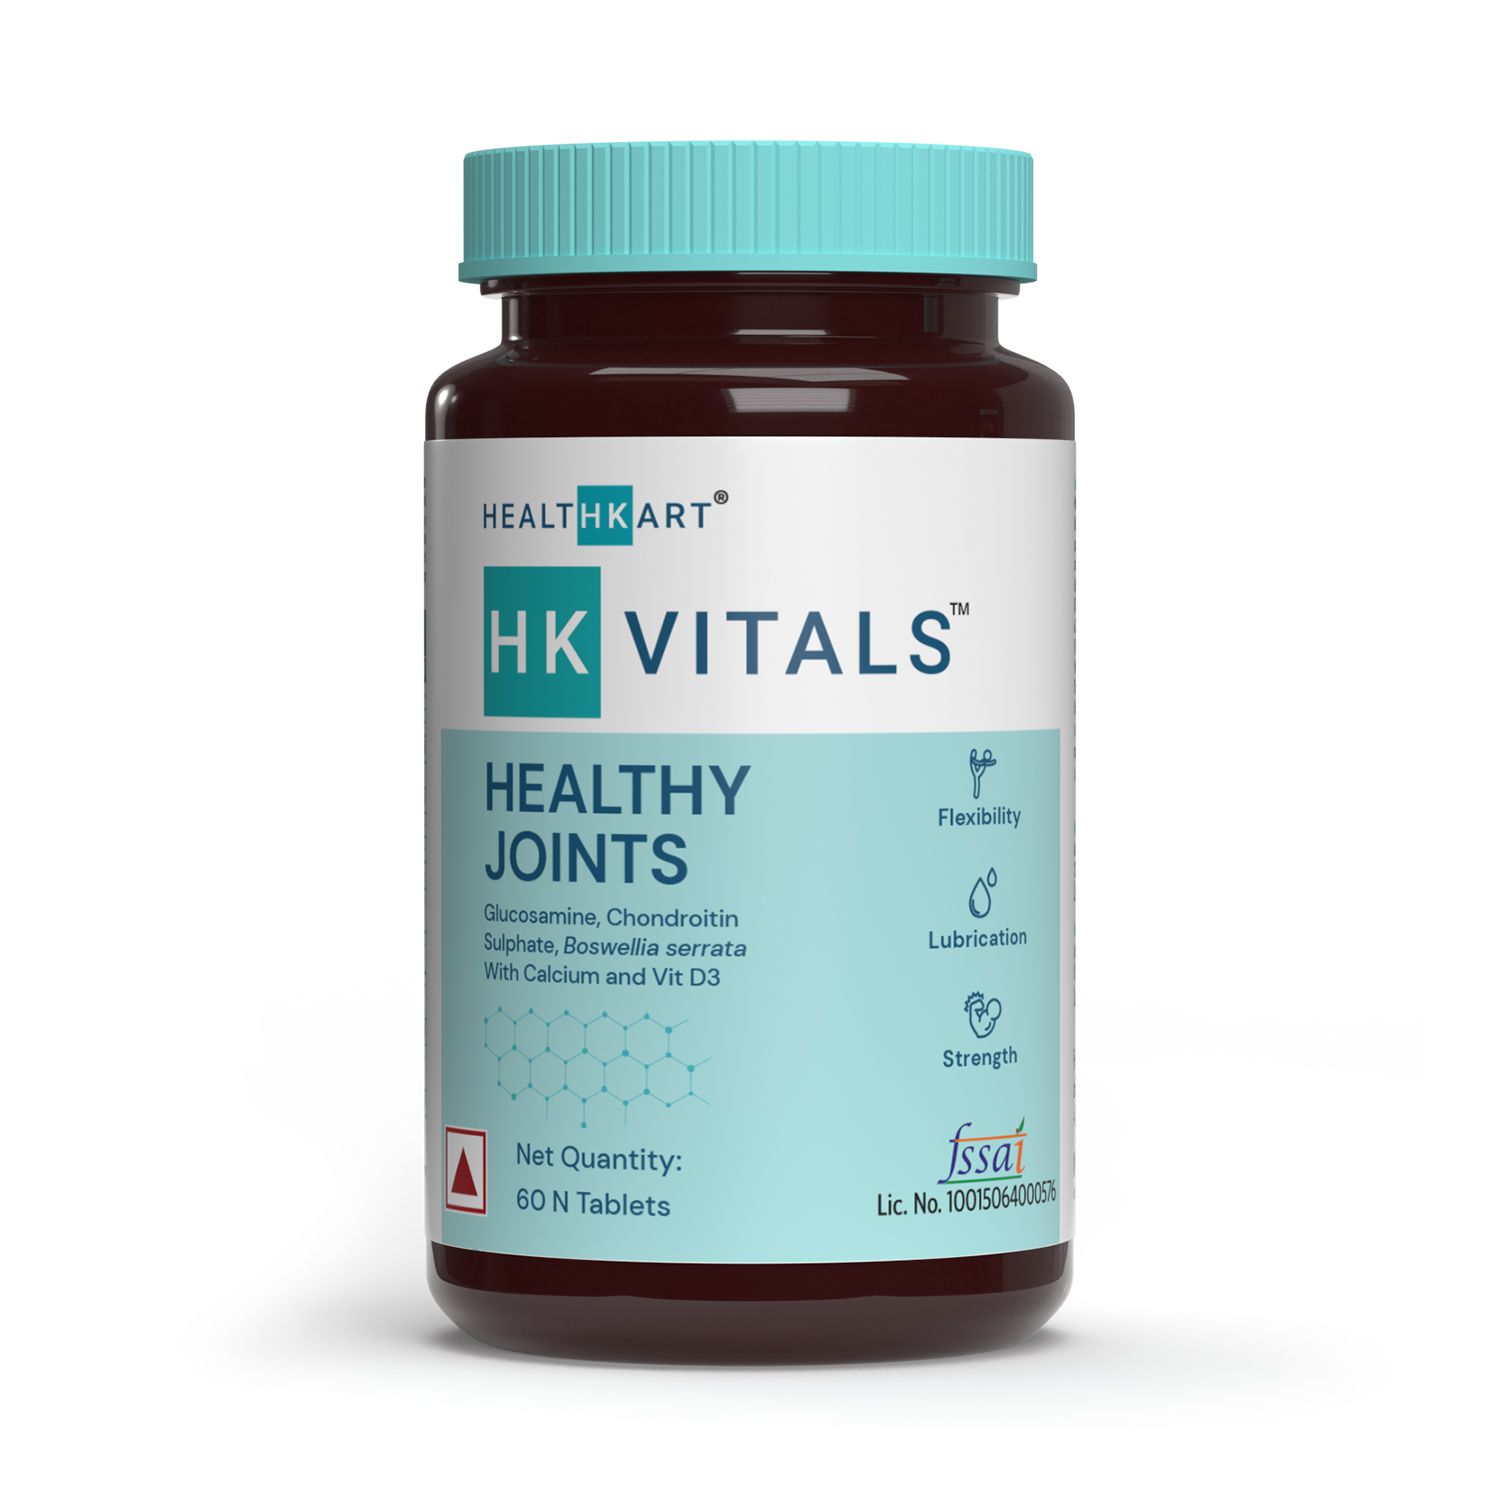 HealthKart HK Vitals Joint Support Supplement, with Glucosamine 1400 mg, Chondroitin, Calcium and Vitamin D3, 60 Tablets